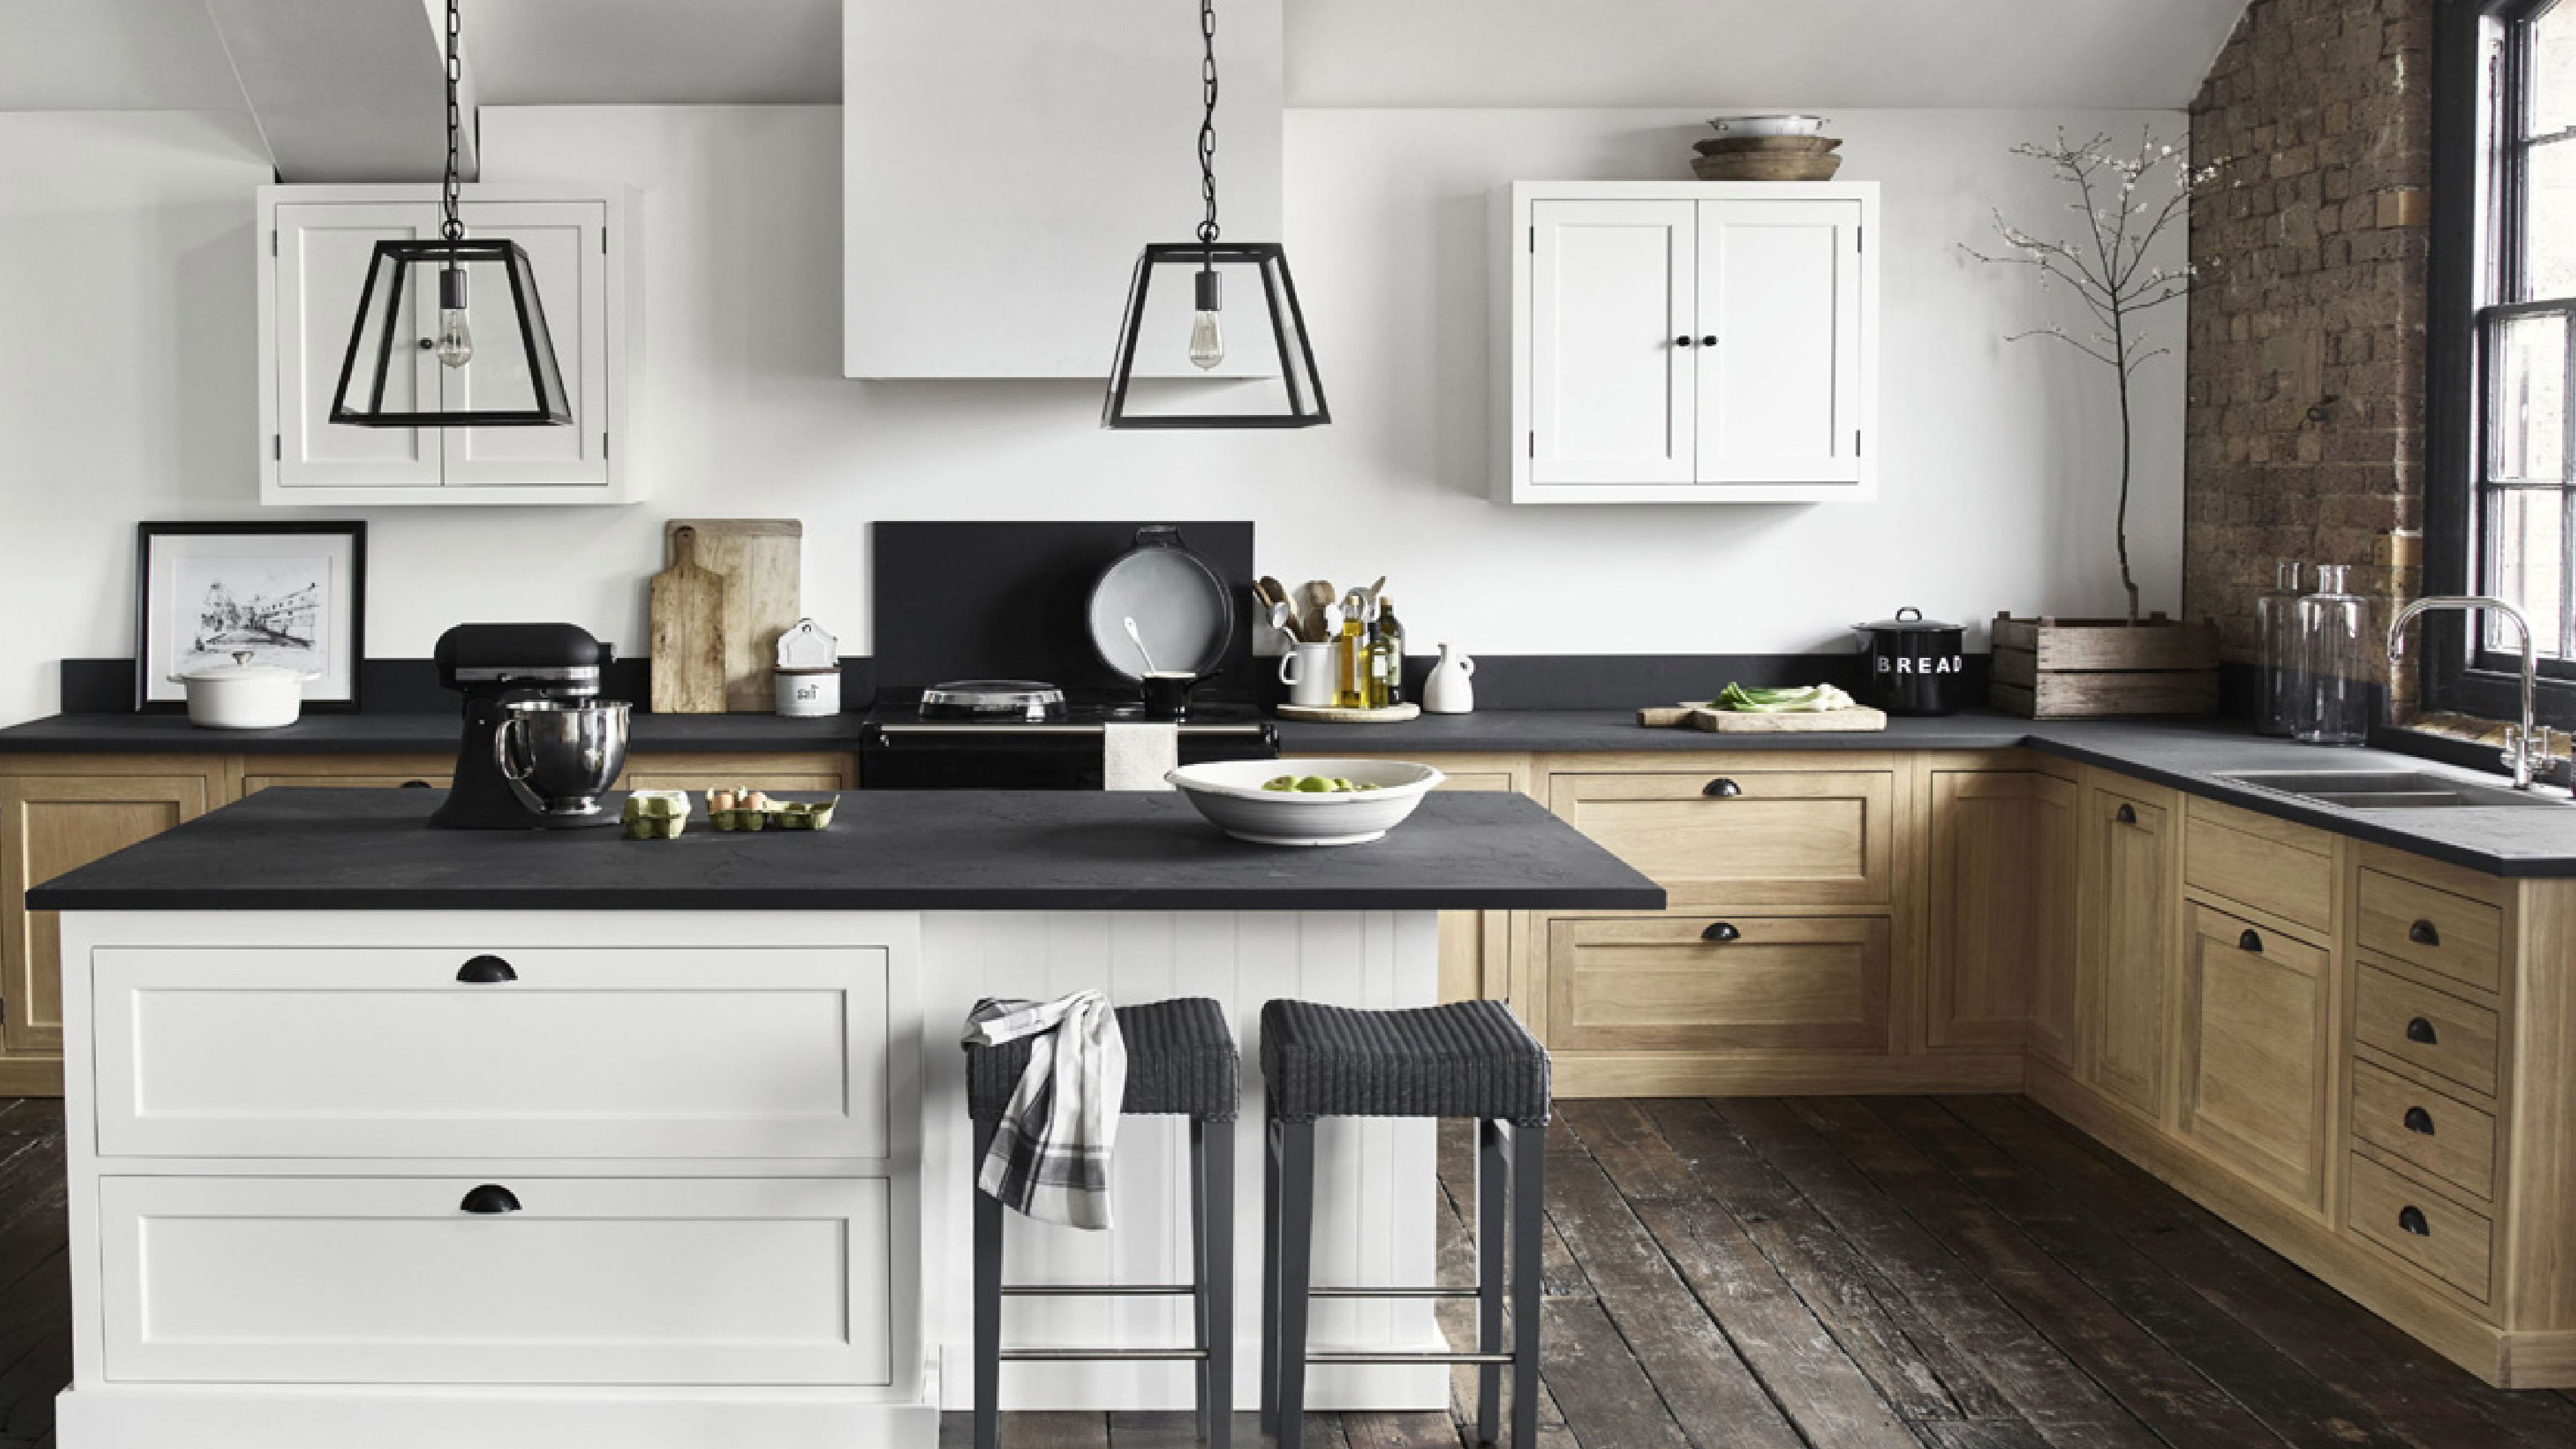 20 kitchen interior design tips from an expert – create your dream